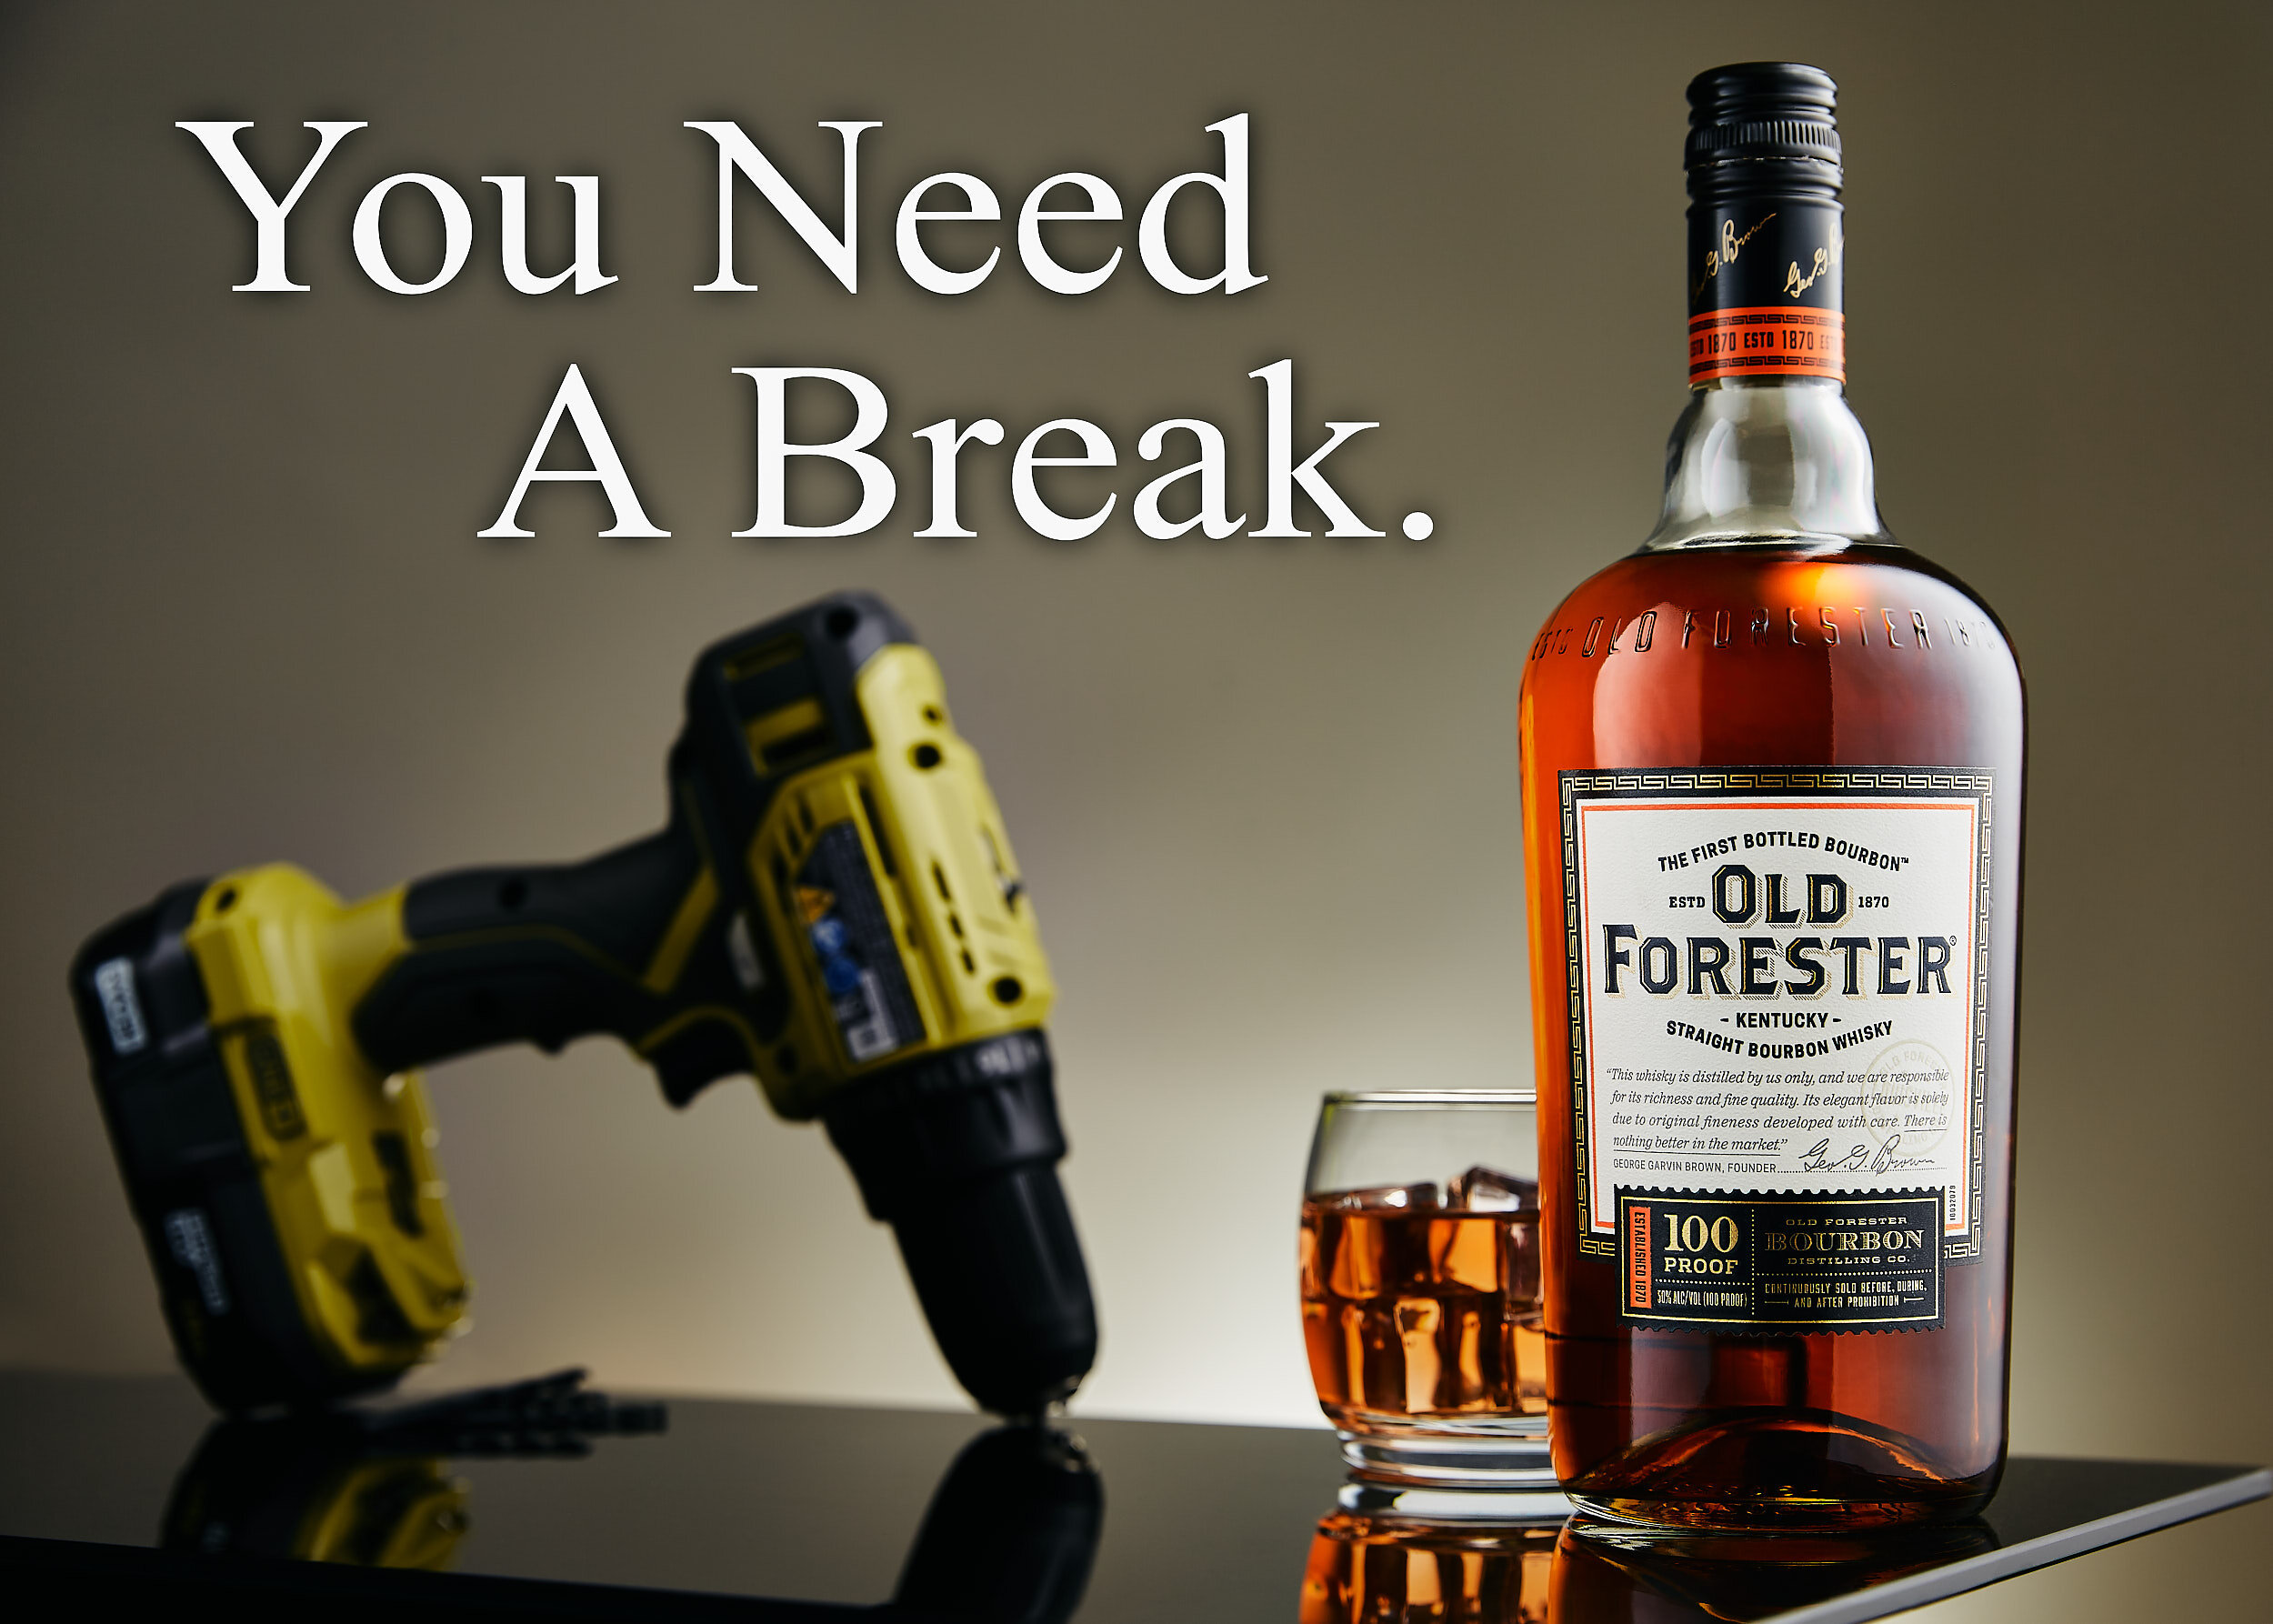 Old_Forester_Whiskey_0082_Comp_Web.jpg